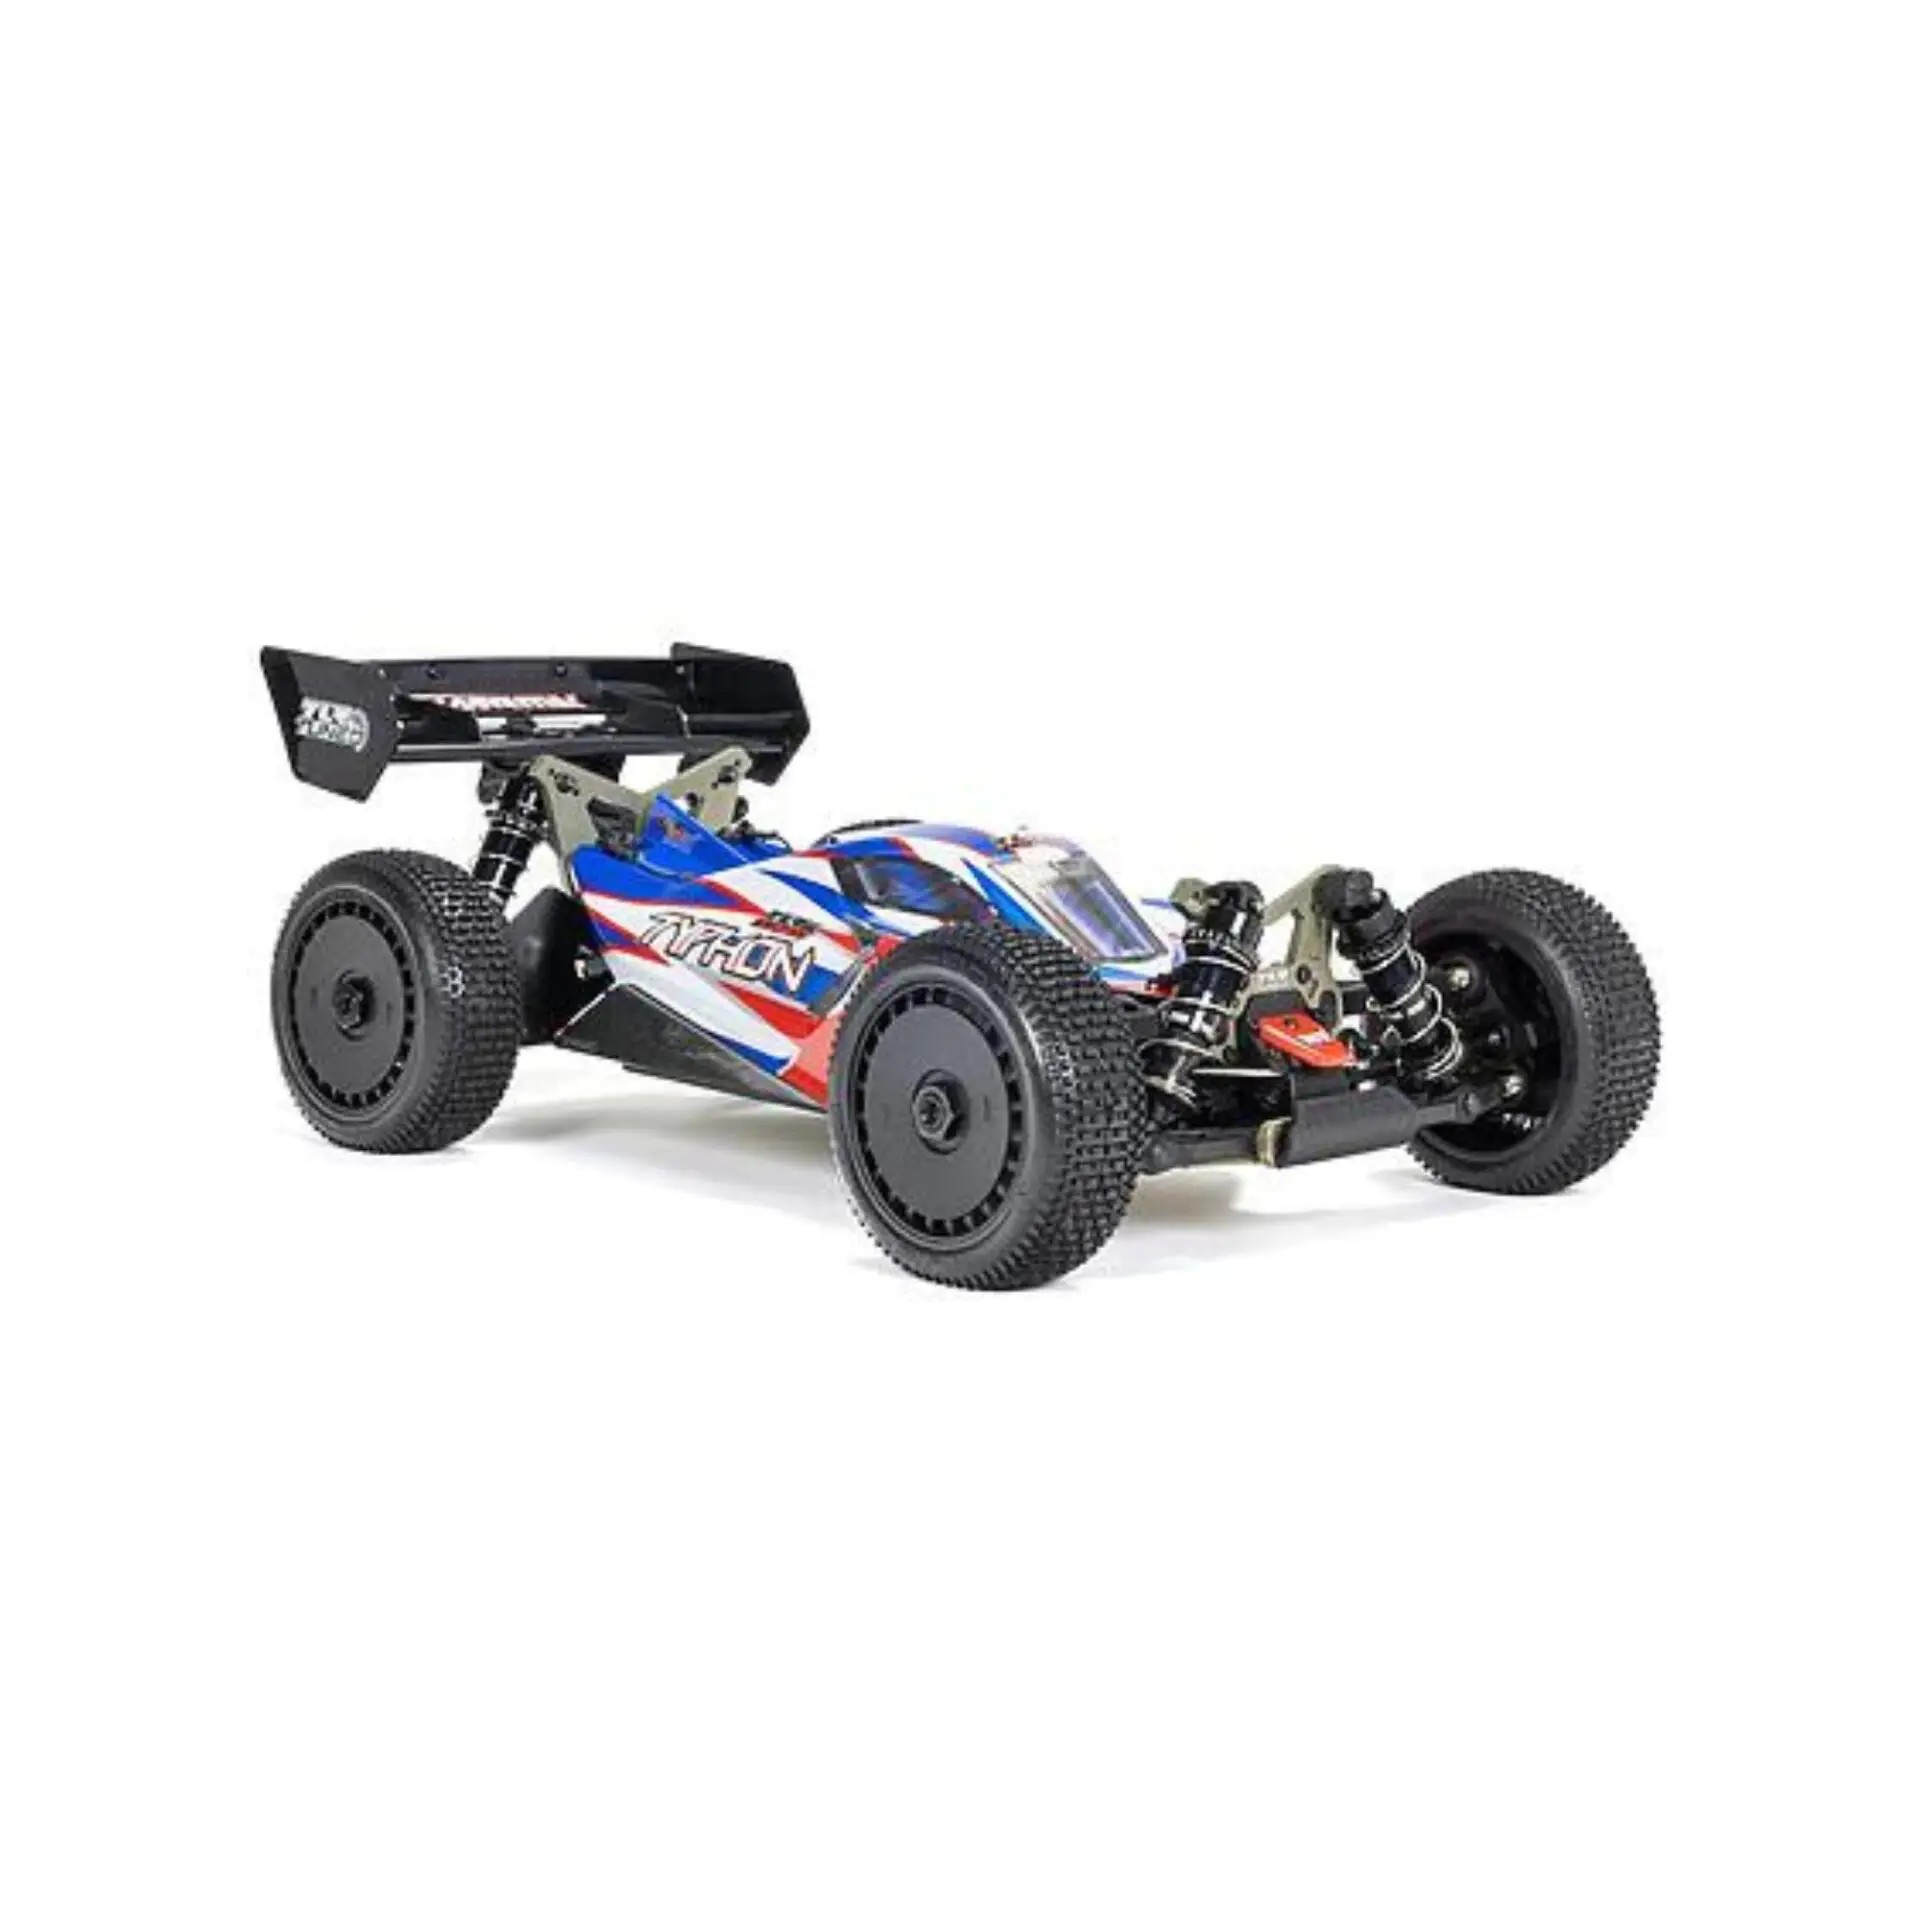 ARRMA Typhon 6S "TLR Tuned" 1/8 4WD RTR Buggy